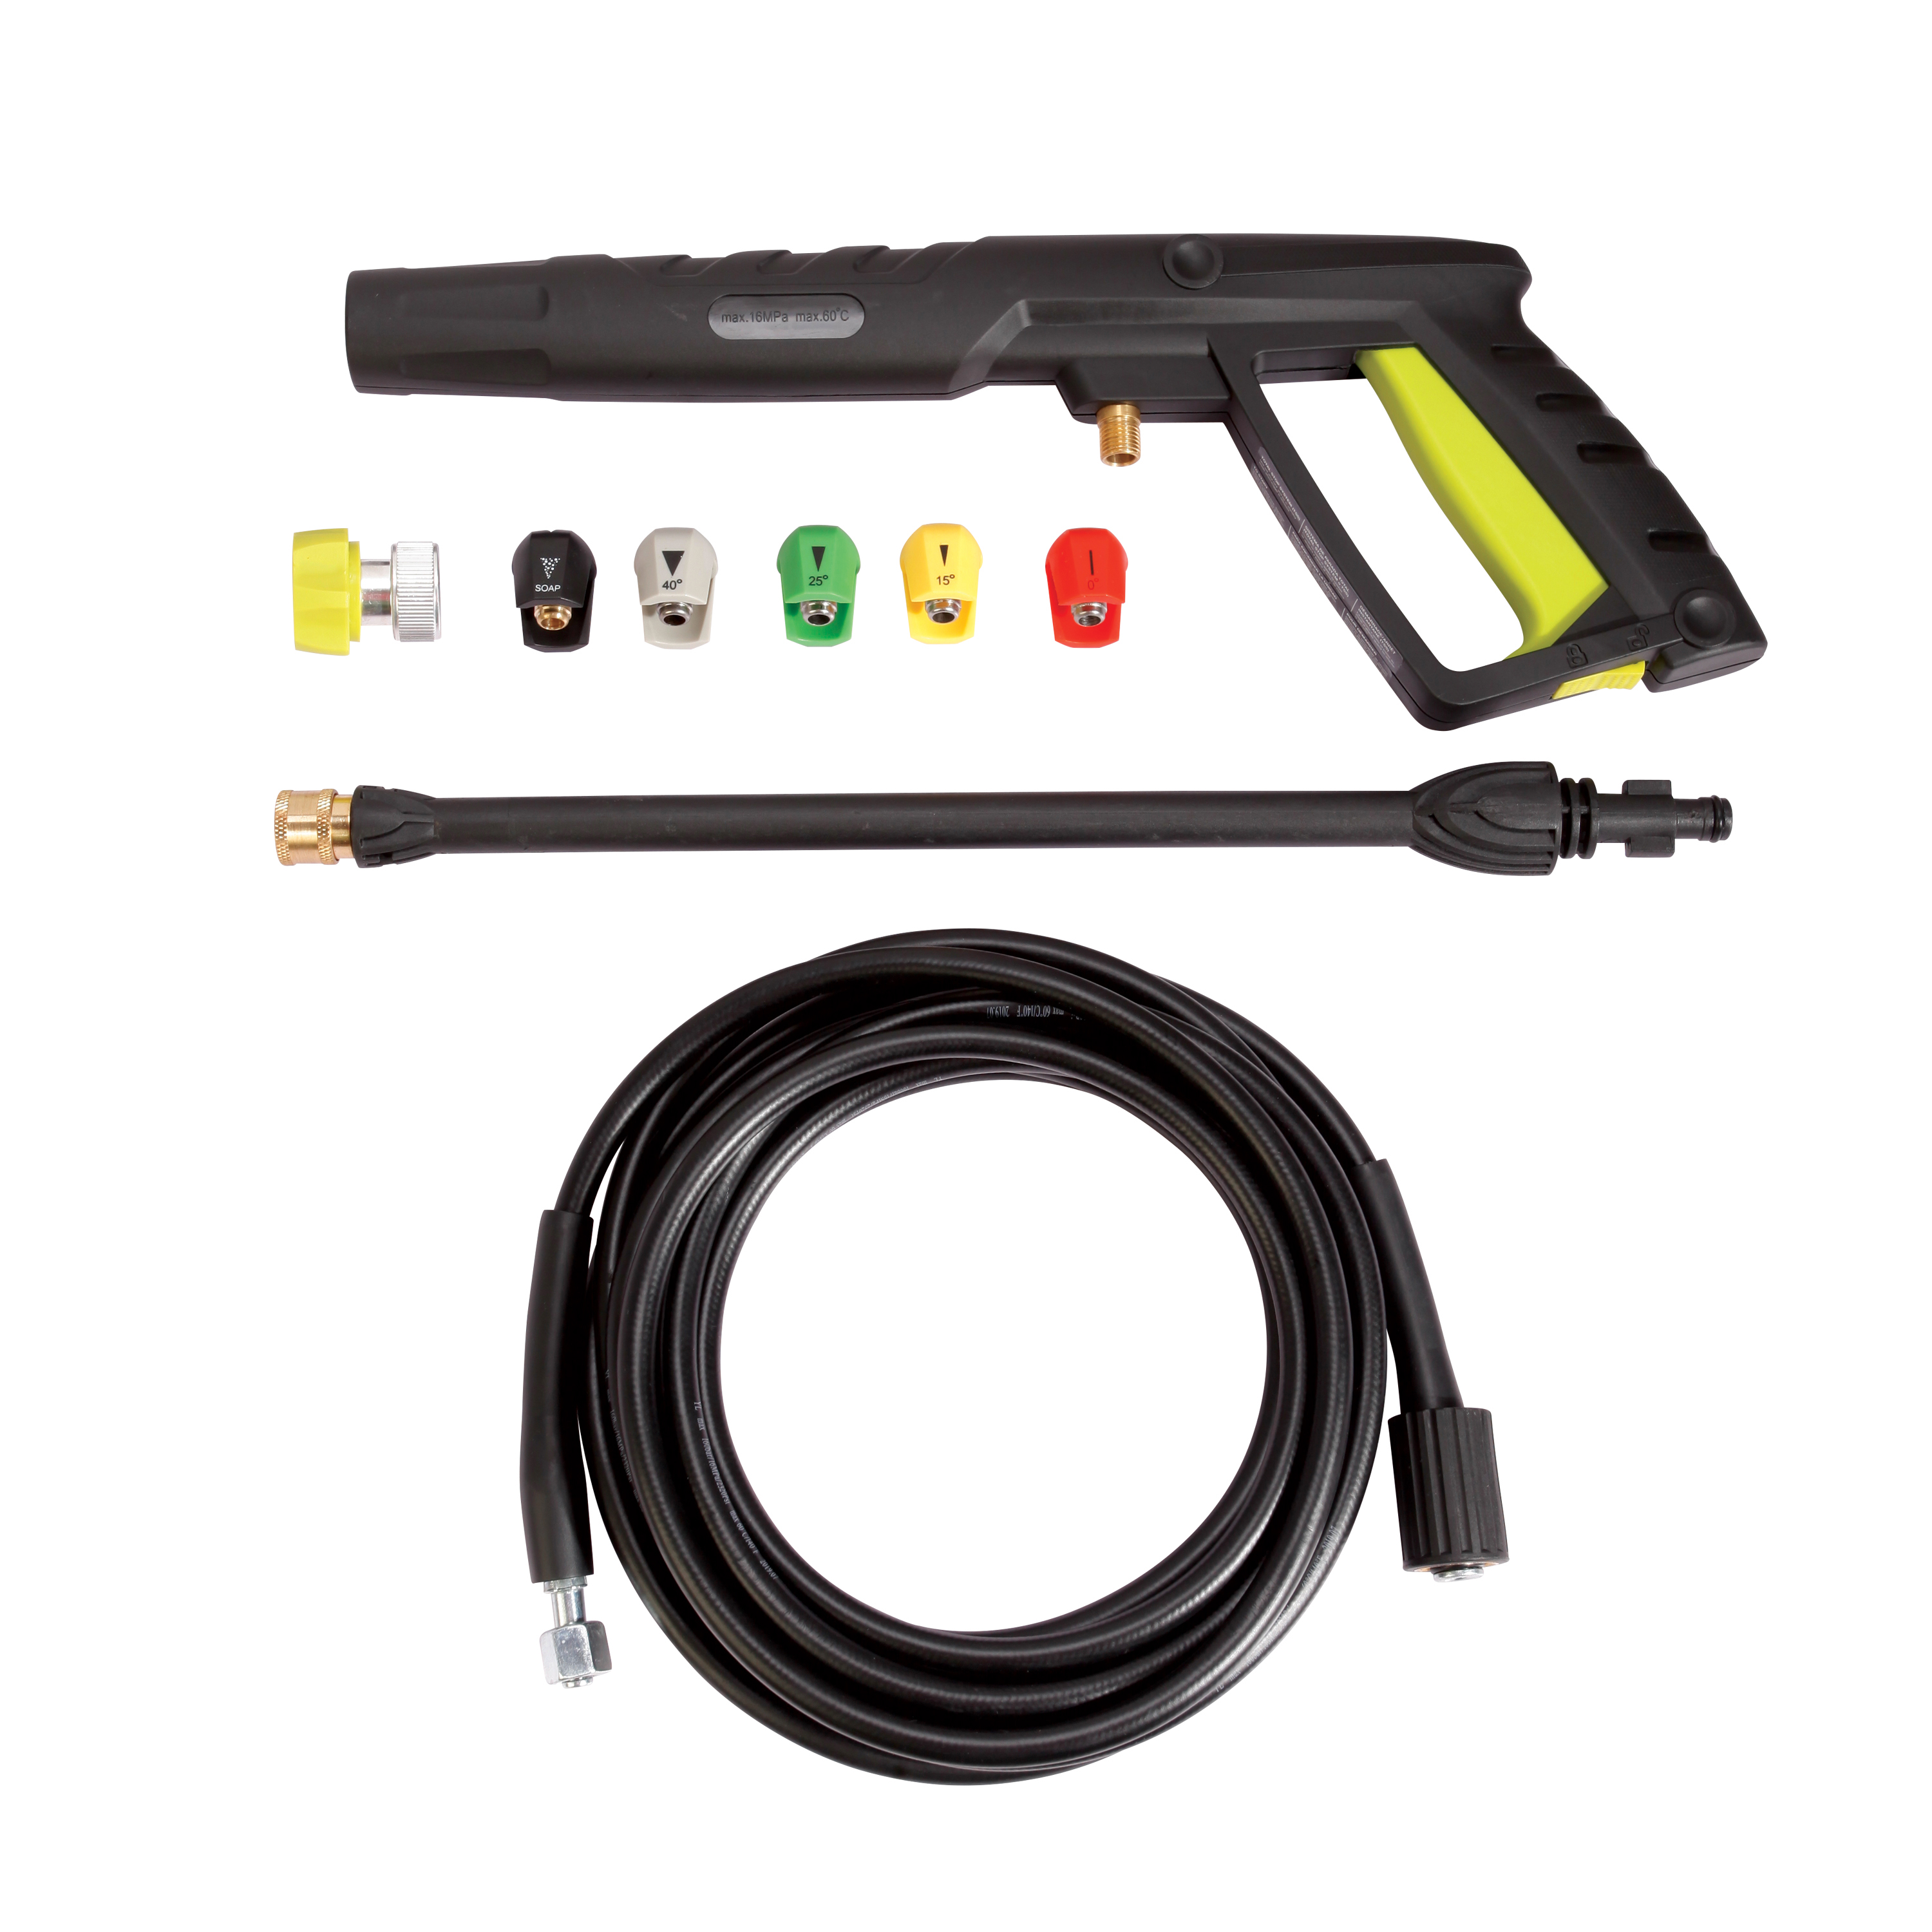 Sun Joe Electric Pressure Washer W/ Quick Connect Nozzles & Extension Wand, 14.5-Amp - image 3 of 8